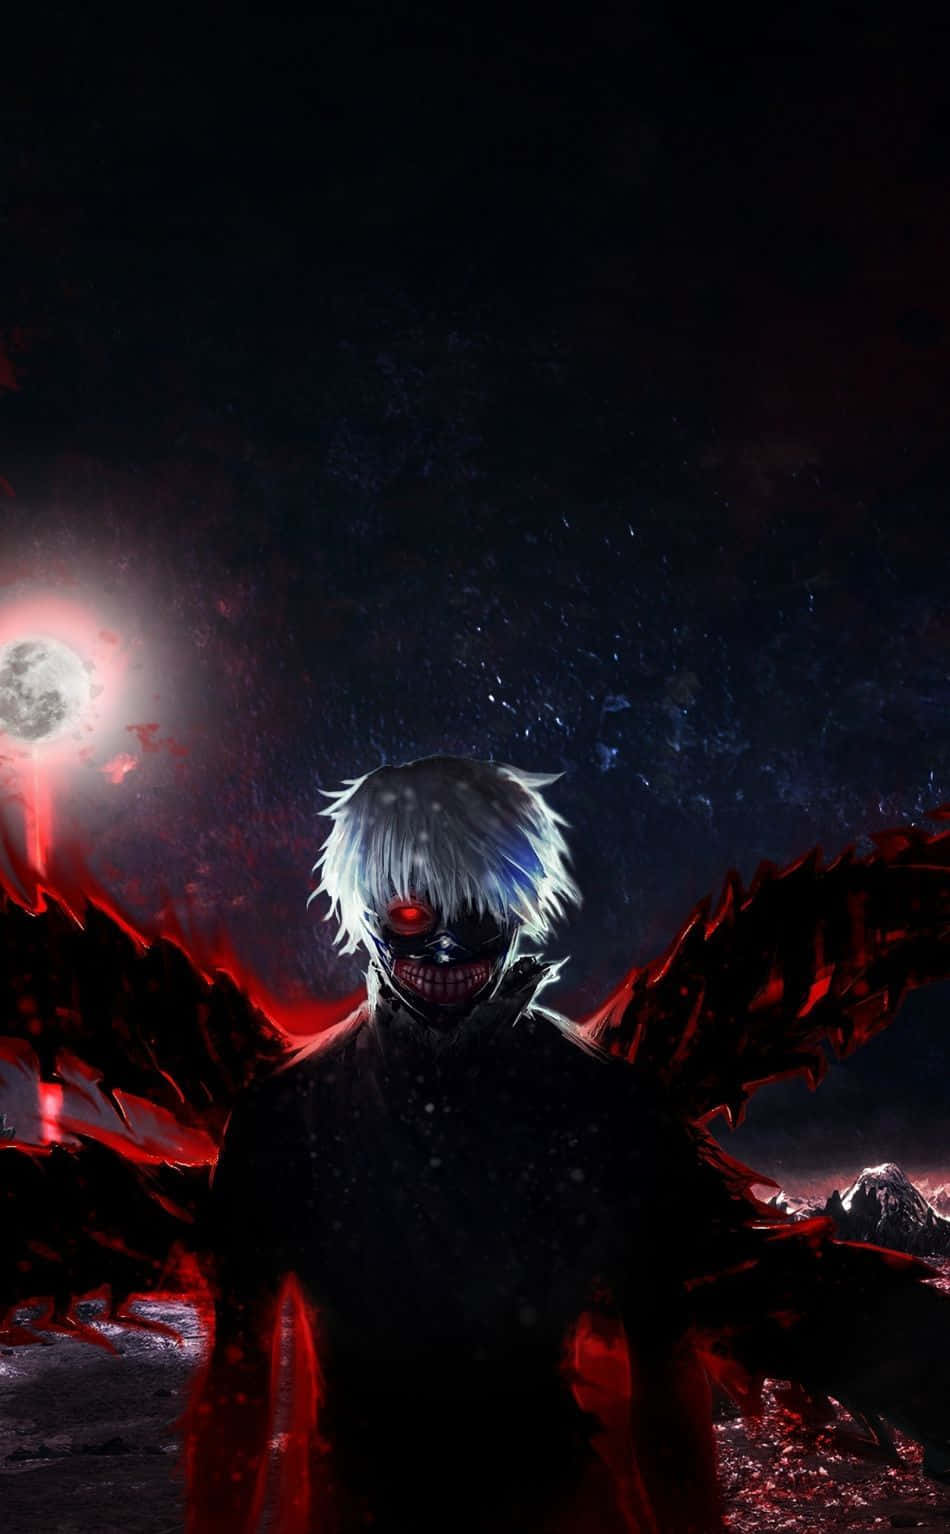 Scary Anime Kaneki With Red Wings Wallpaper